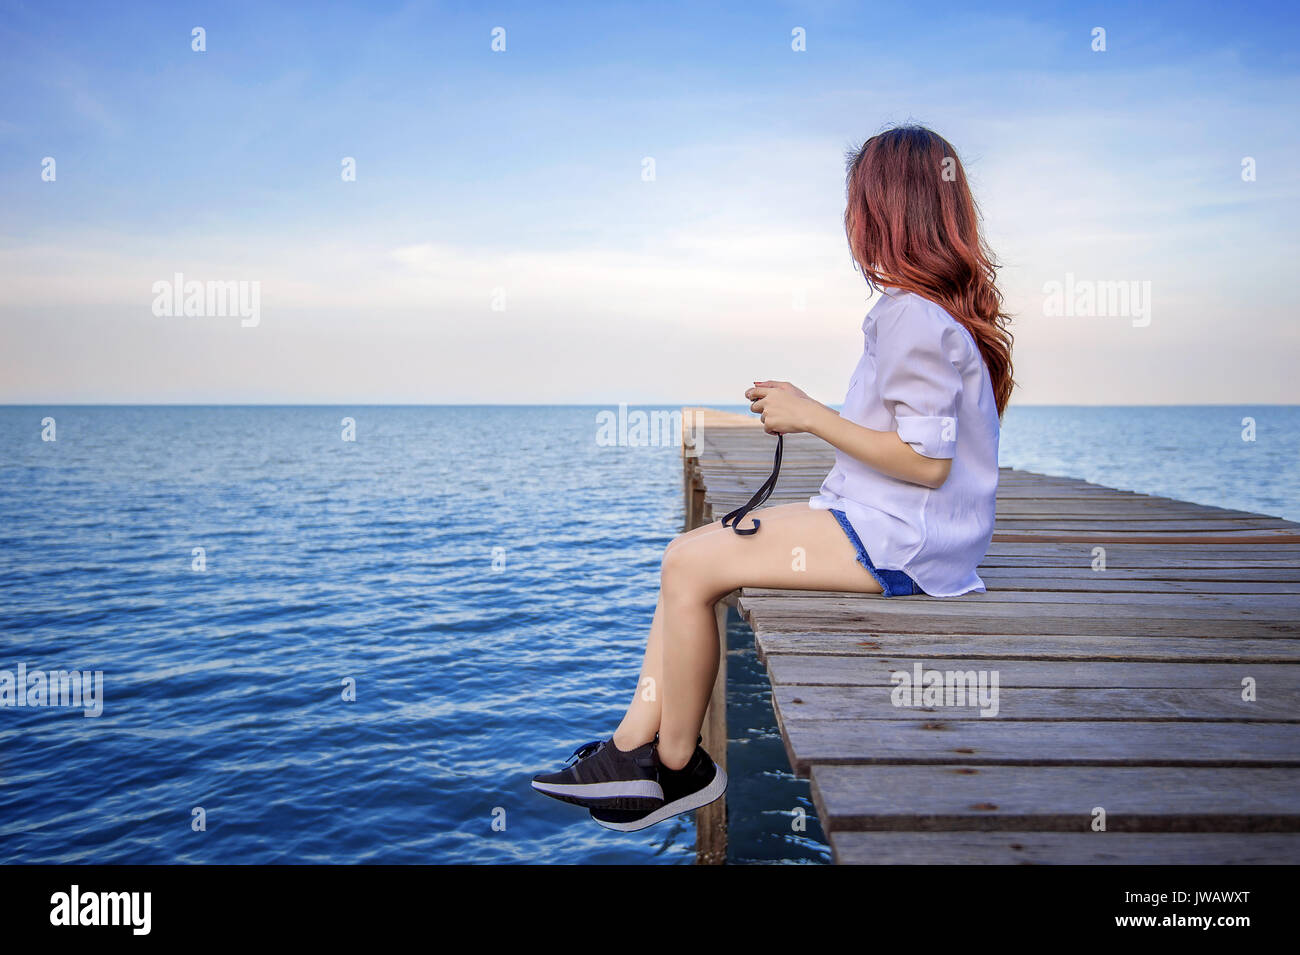 Girl sitting alone on a the wooden bridge on the sea. Vintage tone style. Stock Photo